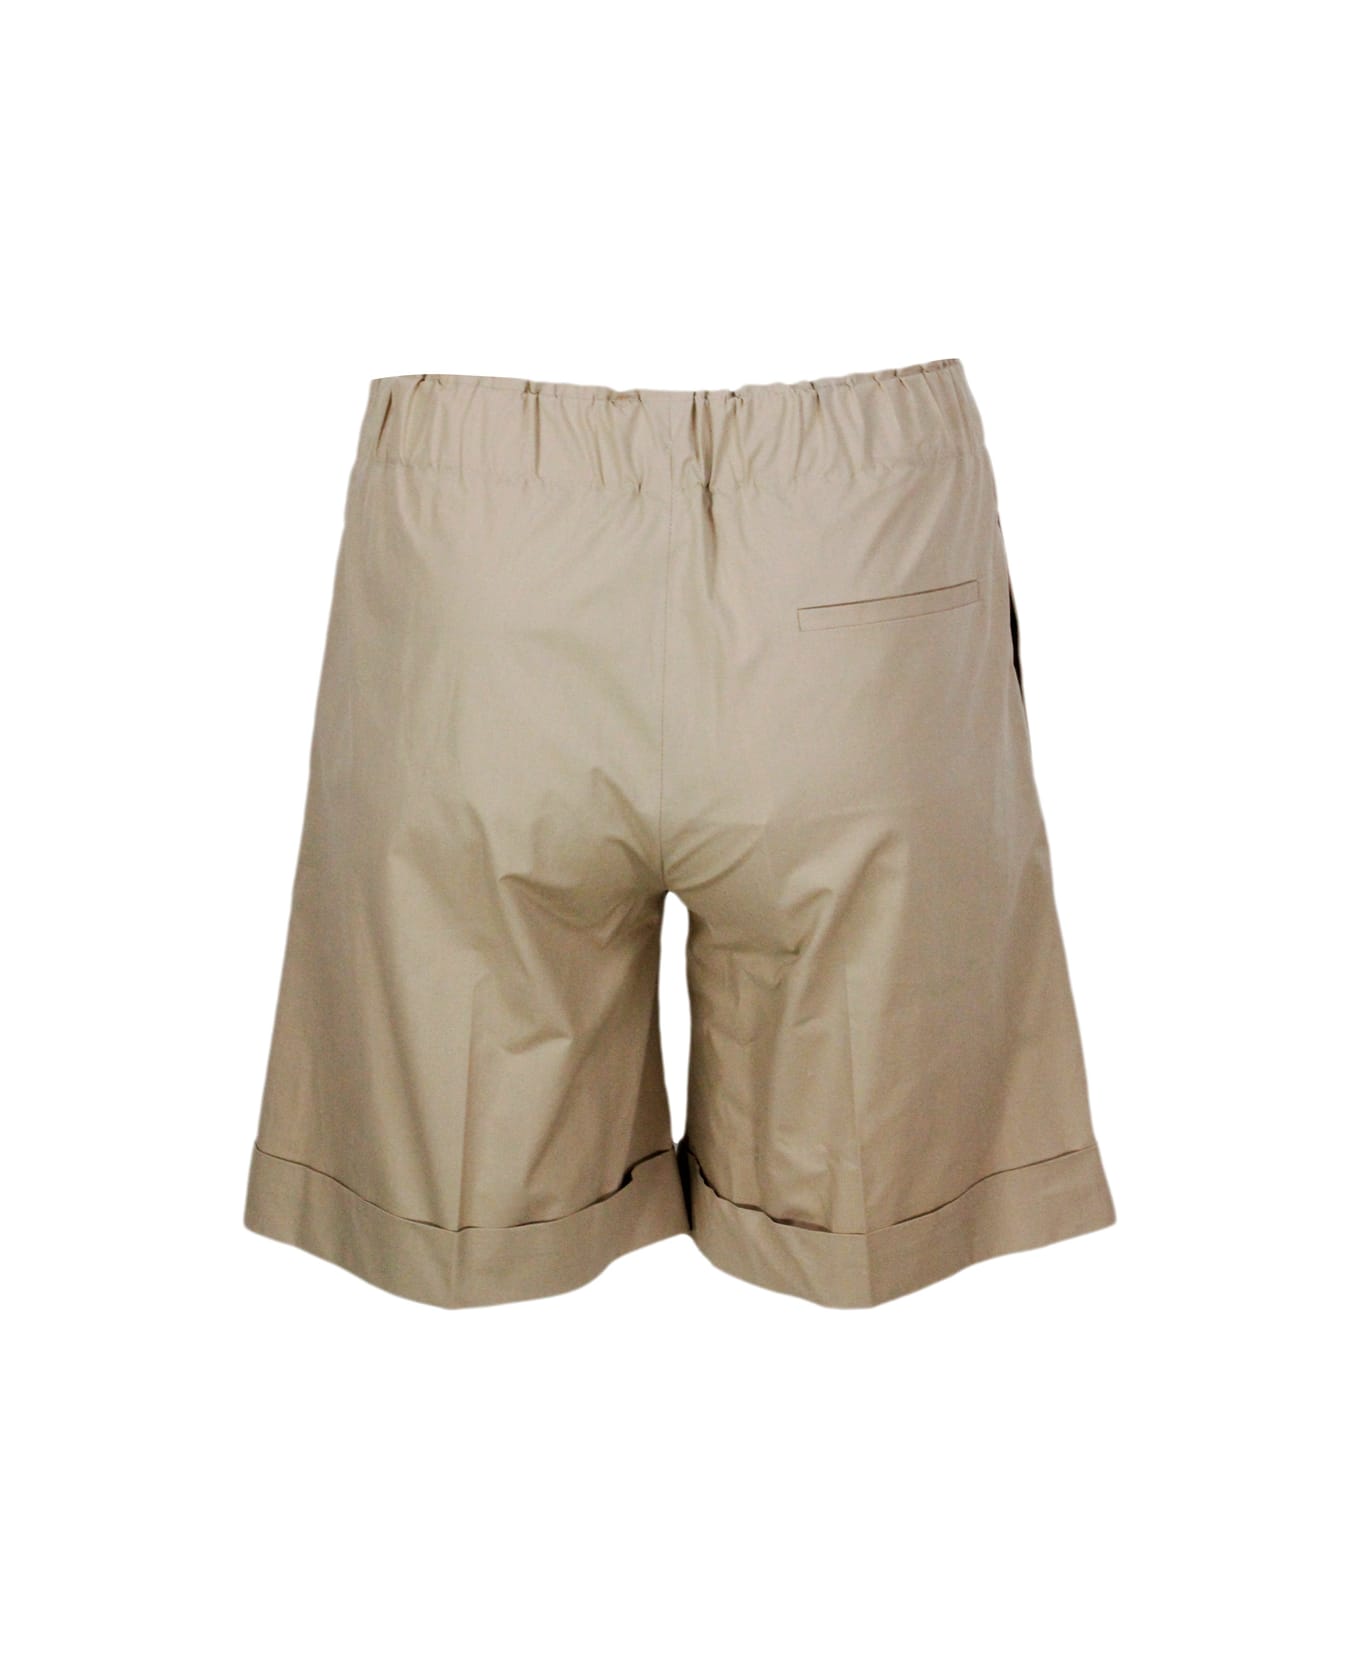 Antonelli Bermuda Shorts With Elasticated Waist And Welt Pockets With Pleats And Turn-up At The Bottom Made Of Stretch Cotton - Beige ショートパンツ